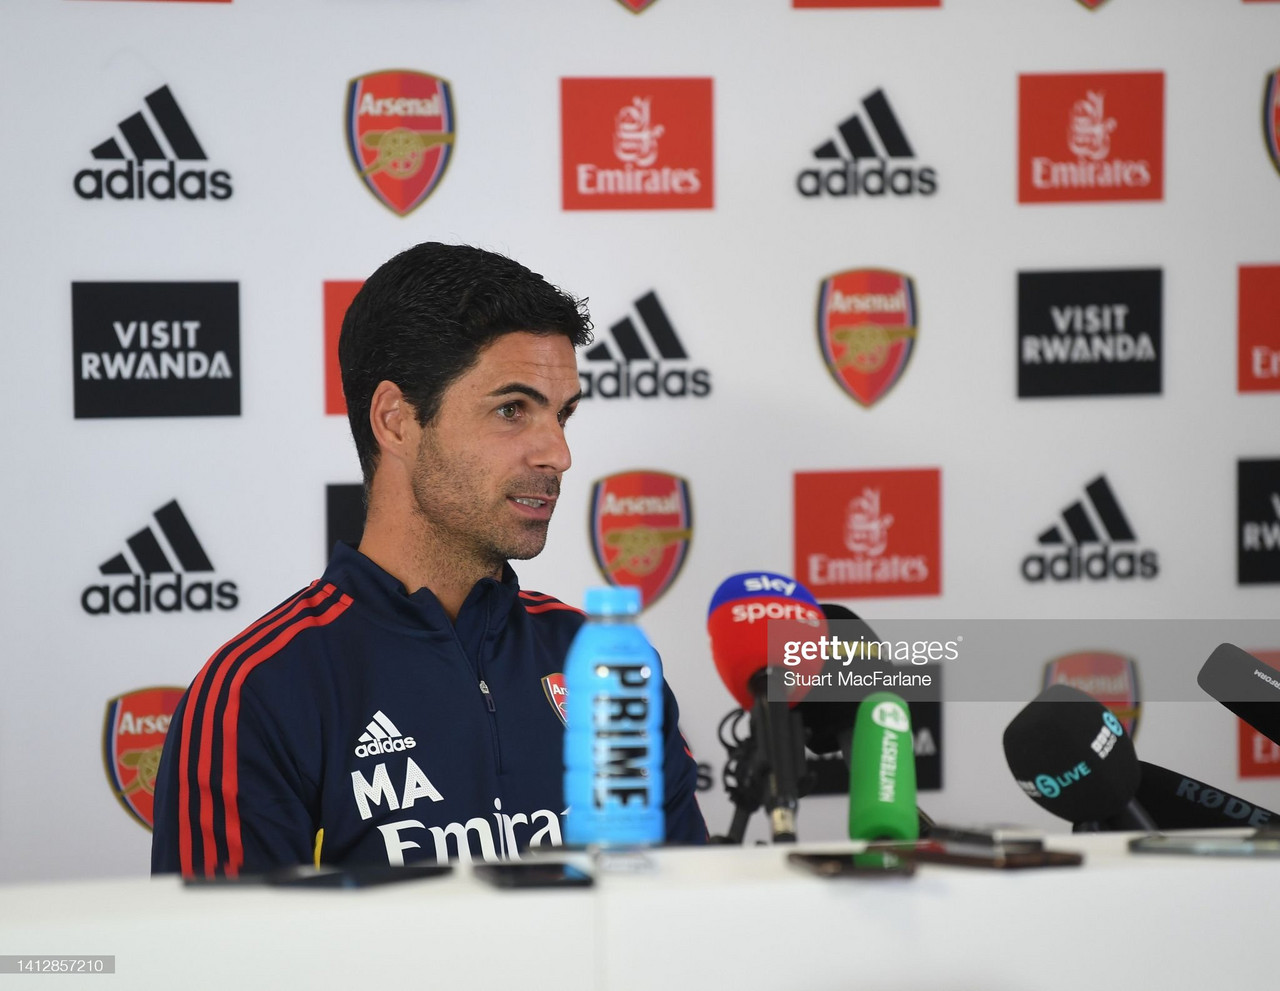 Mikel Arteta says he's 'enthusiastic' ahead of Arsenal's visit to Crystal Palace 